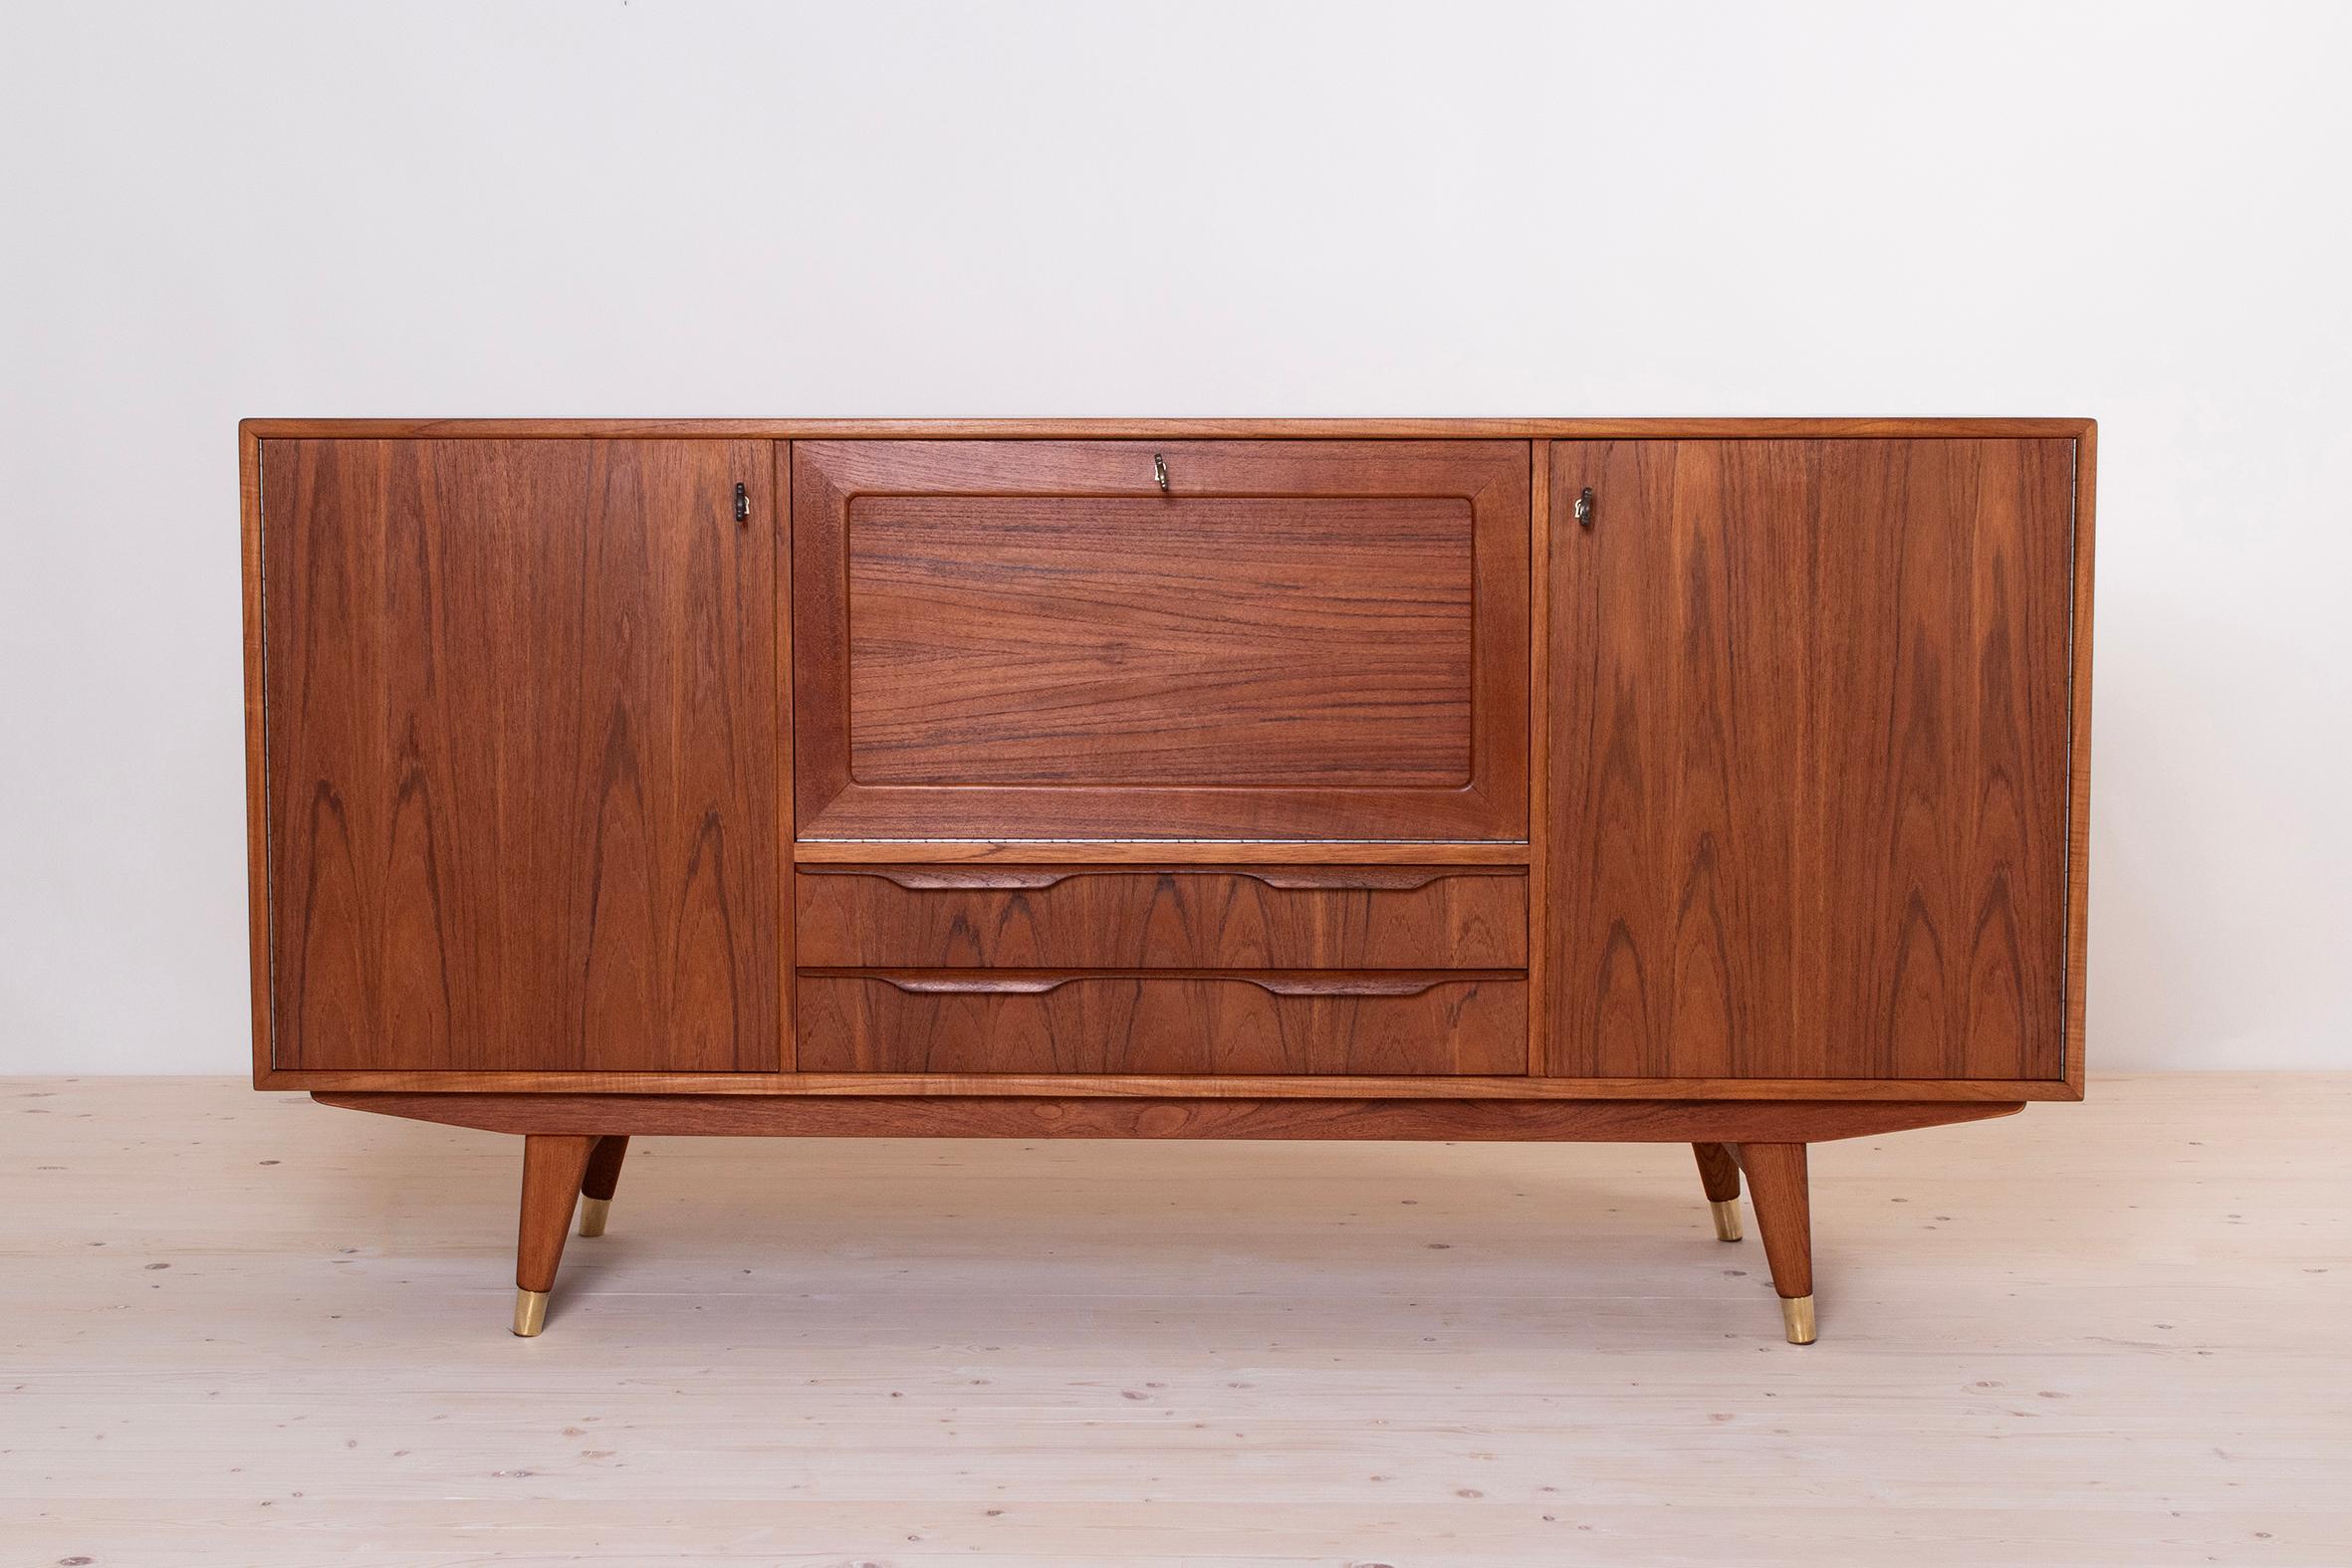 This beautifully designed sideboard comes from Norway and was made around 1960s. It is made of teak wood. It features three storage sections and additionally two spacious drawers in the bottom area. Each section is lockable with a key. In the center